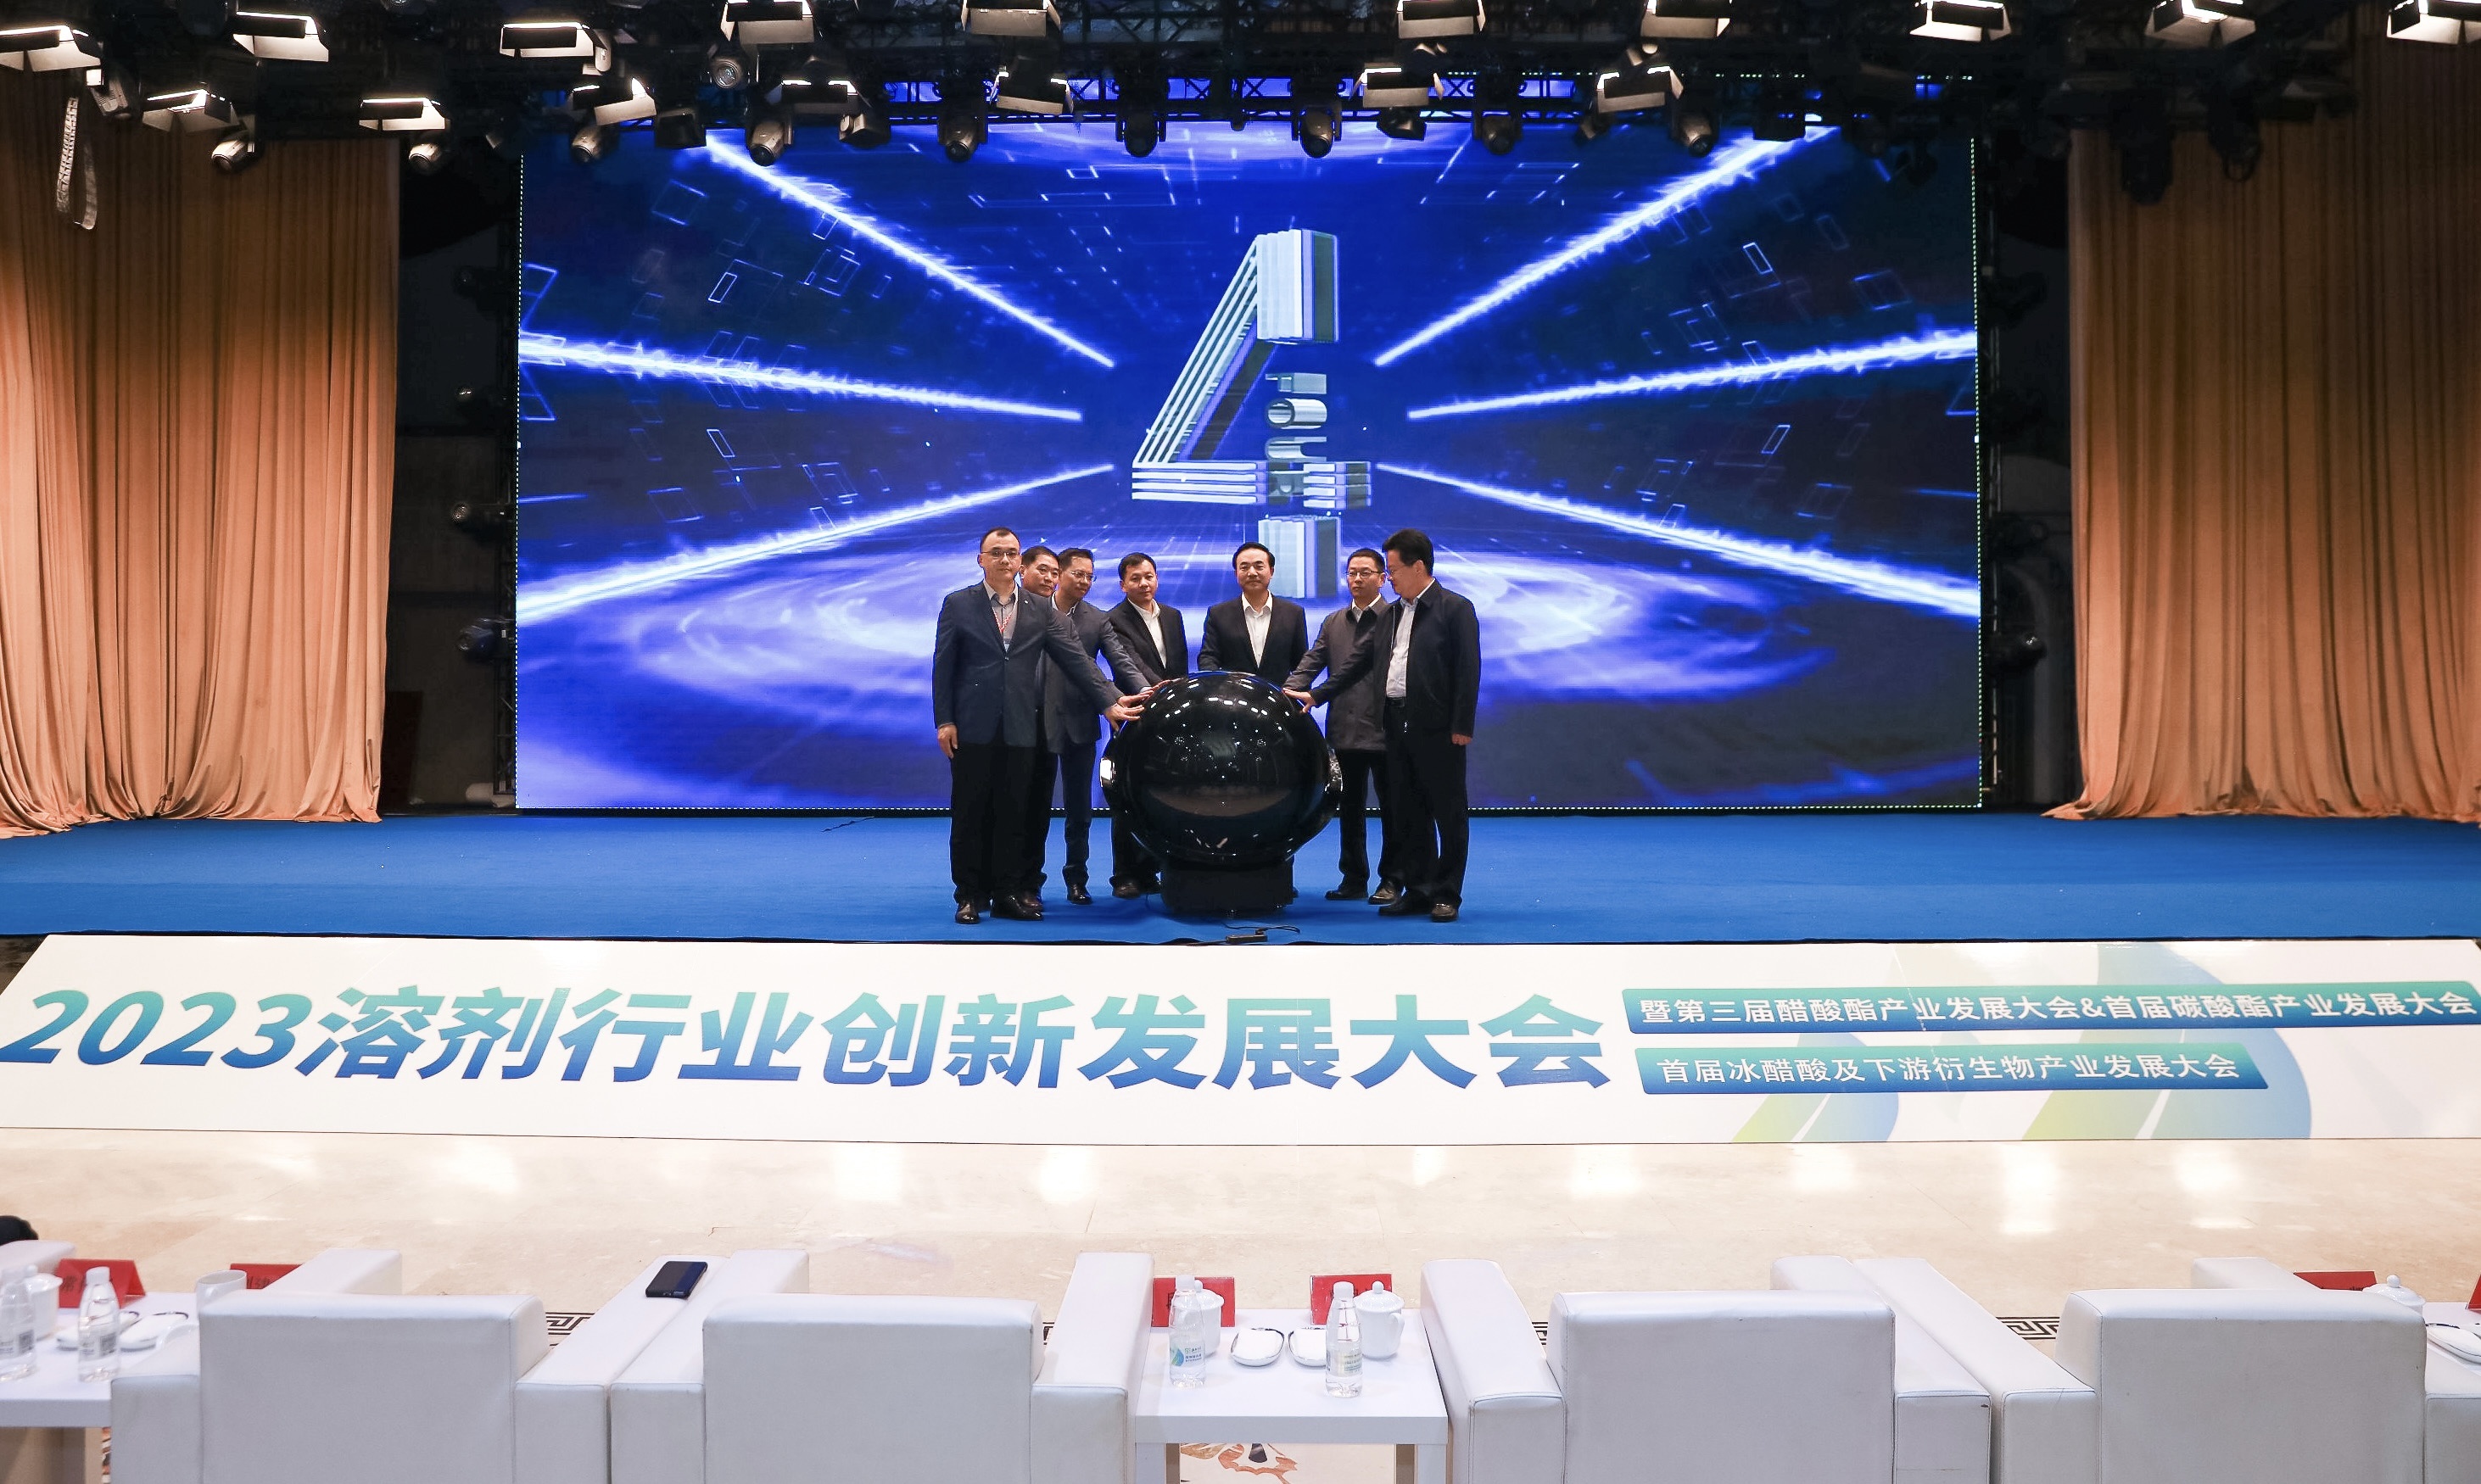 [2023 Solvent Industry Innovation and Development Conference Successfully Held in Yongyong]-New Product Launch Conference to Promote the Innovation and Development of Solvent Industry, Shangqiu Yongcheng Two-level Government Support and Location Advantages to Create a Win-Win Future!